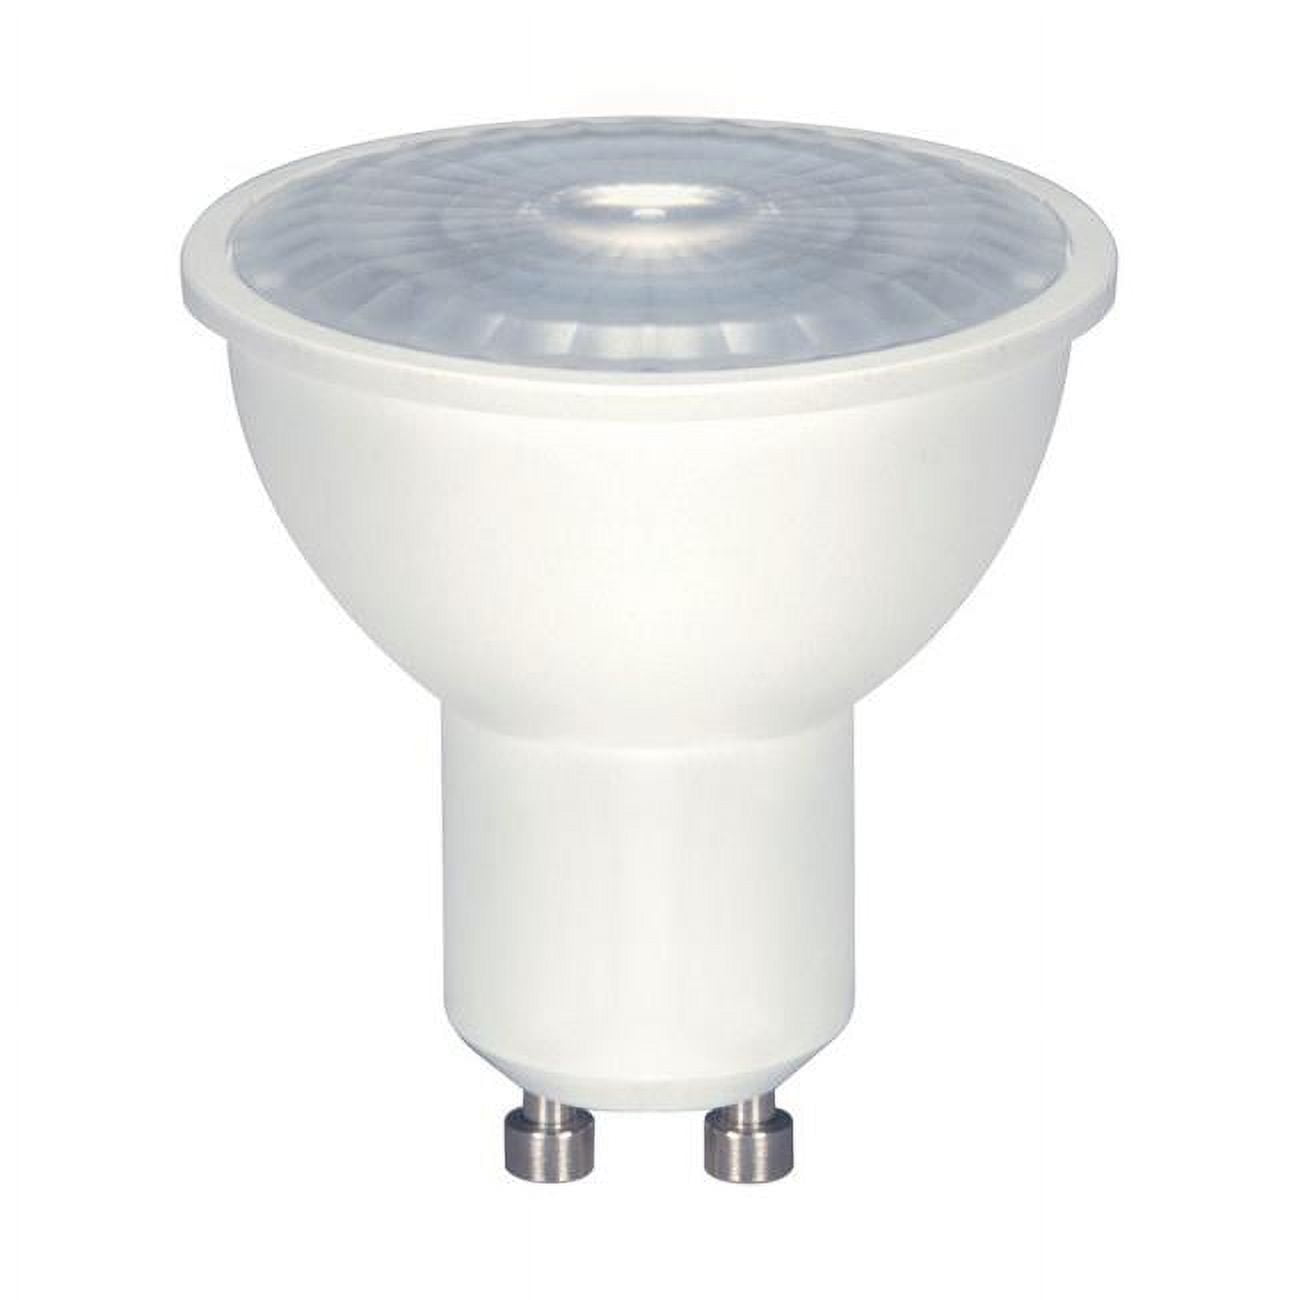 Picture of Satco 3862687 6.5W MR16 LED Bulb, 500 Lumens - Warm White